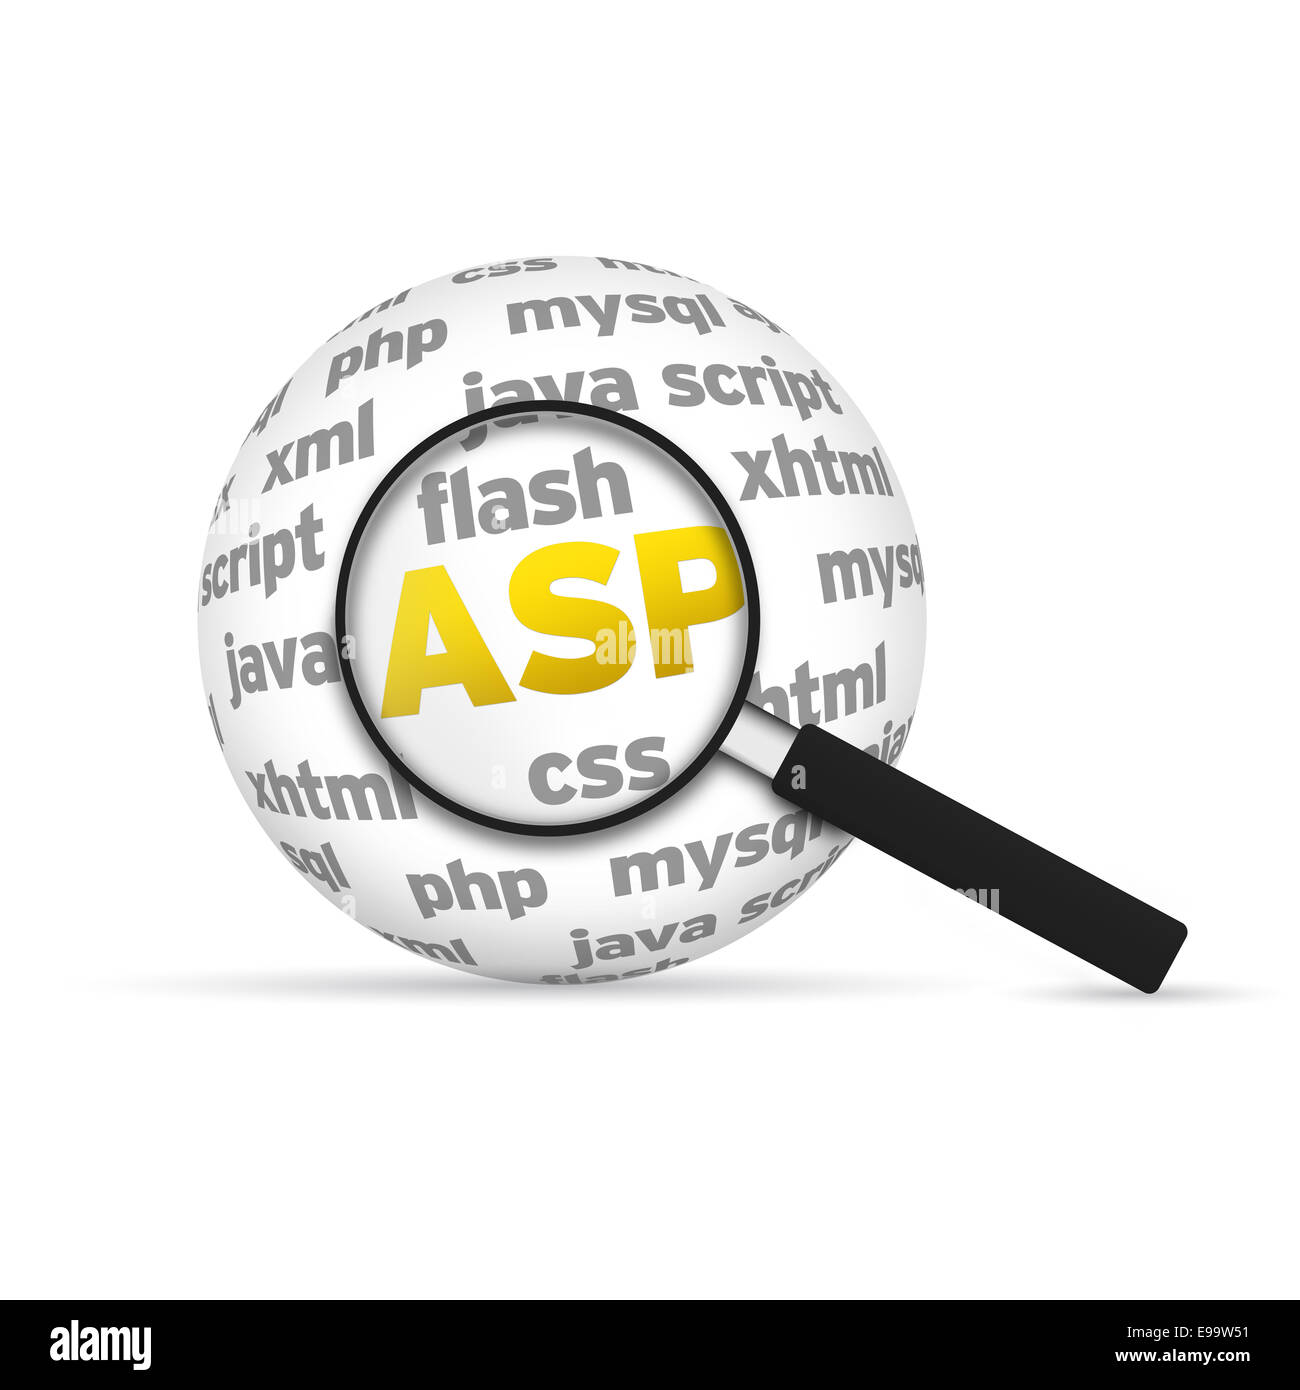 Active Server Pages Stockfoto